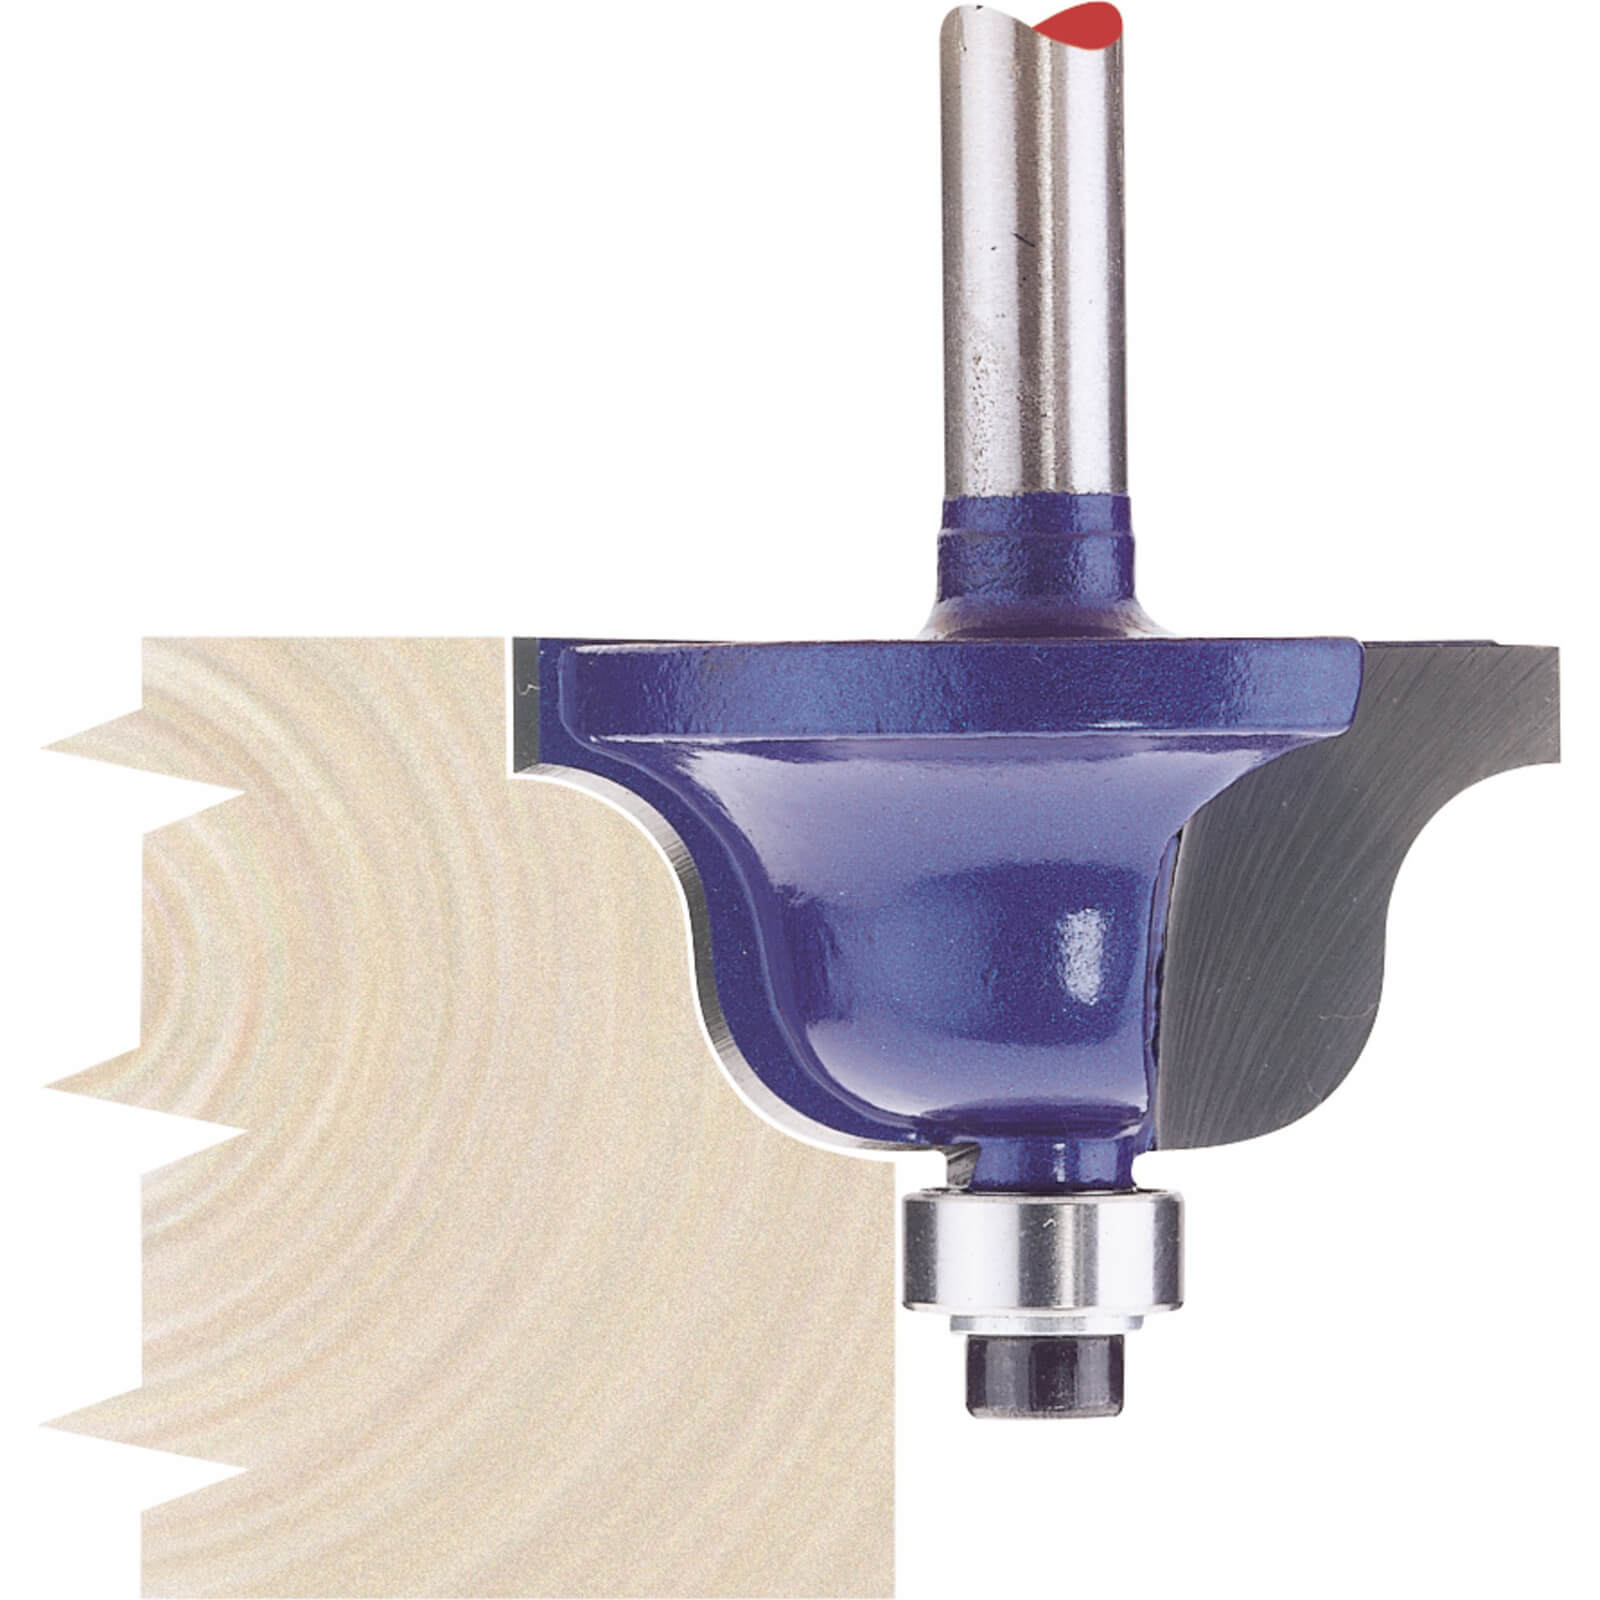 Image of Draper Bearing Guided Roman Ogee Router Cutter 35mm 17mm 1/4"